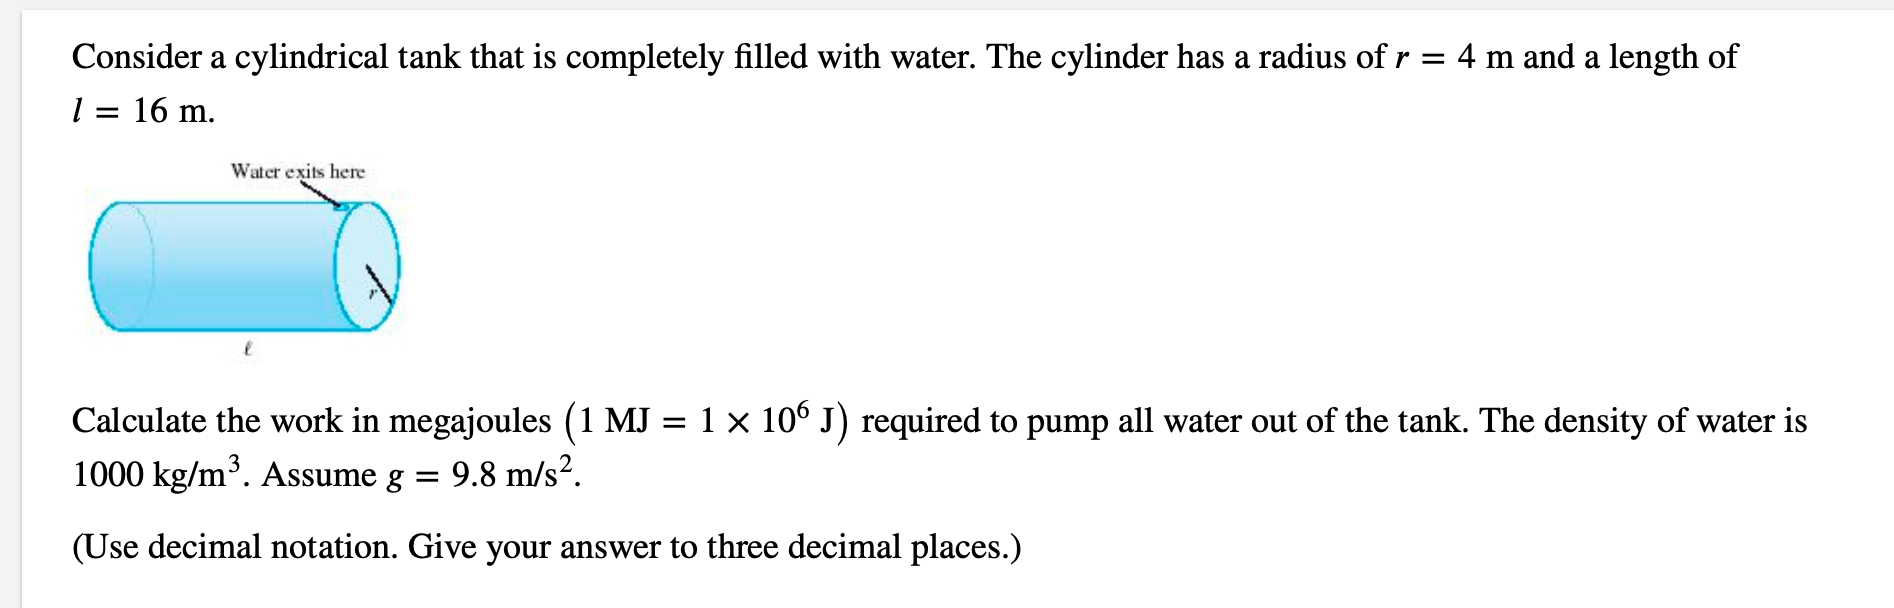 Consider a cylindrical tank that is completely filled with water. The cylinder has a radius of r = 4 m and a length of
l = 16 m.
Water exits here
Calculate the work in megajoules (1 MJ = 1 × 10° J) required to pump all water out of the tank. The density of water is
1000 kg/m³. Assume g = 9.8 m/s².
(Use decimal notation. Give your answer to three decimal places.)
